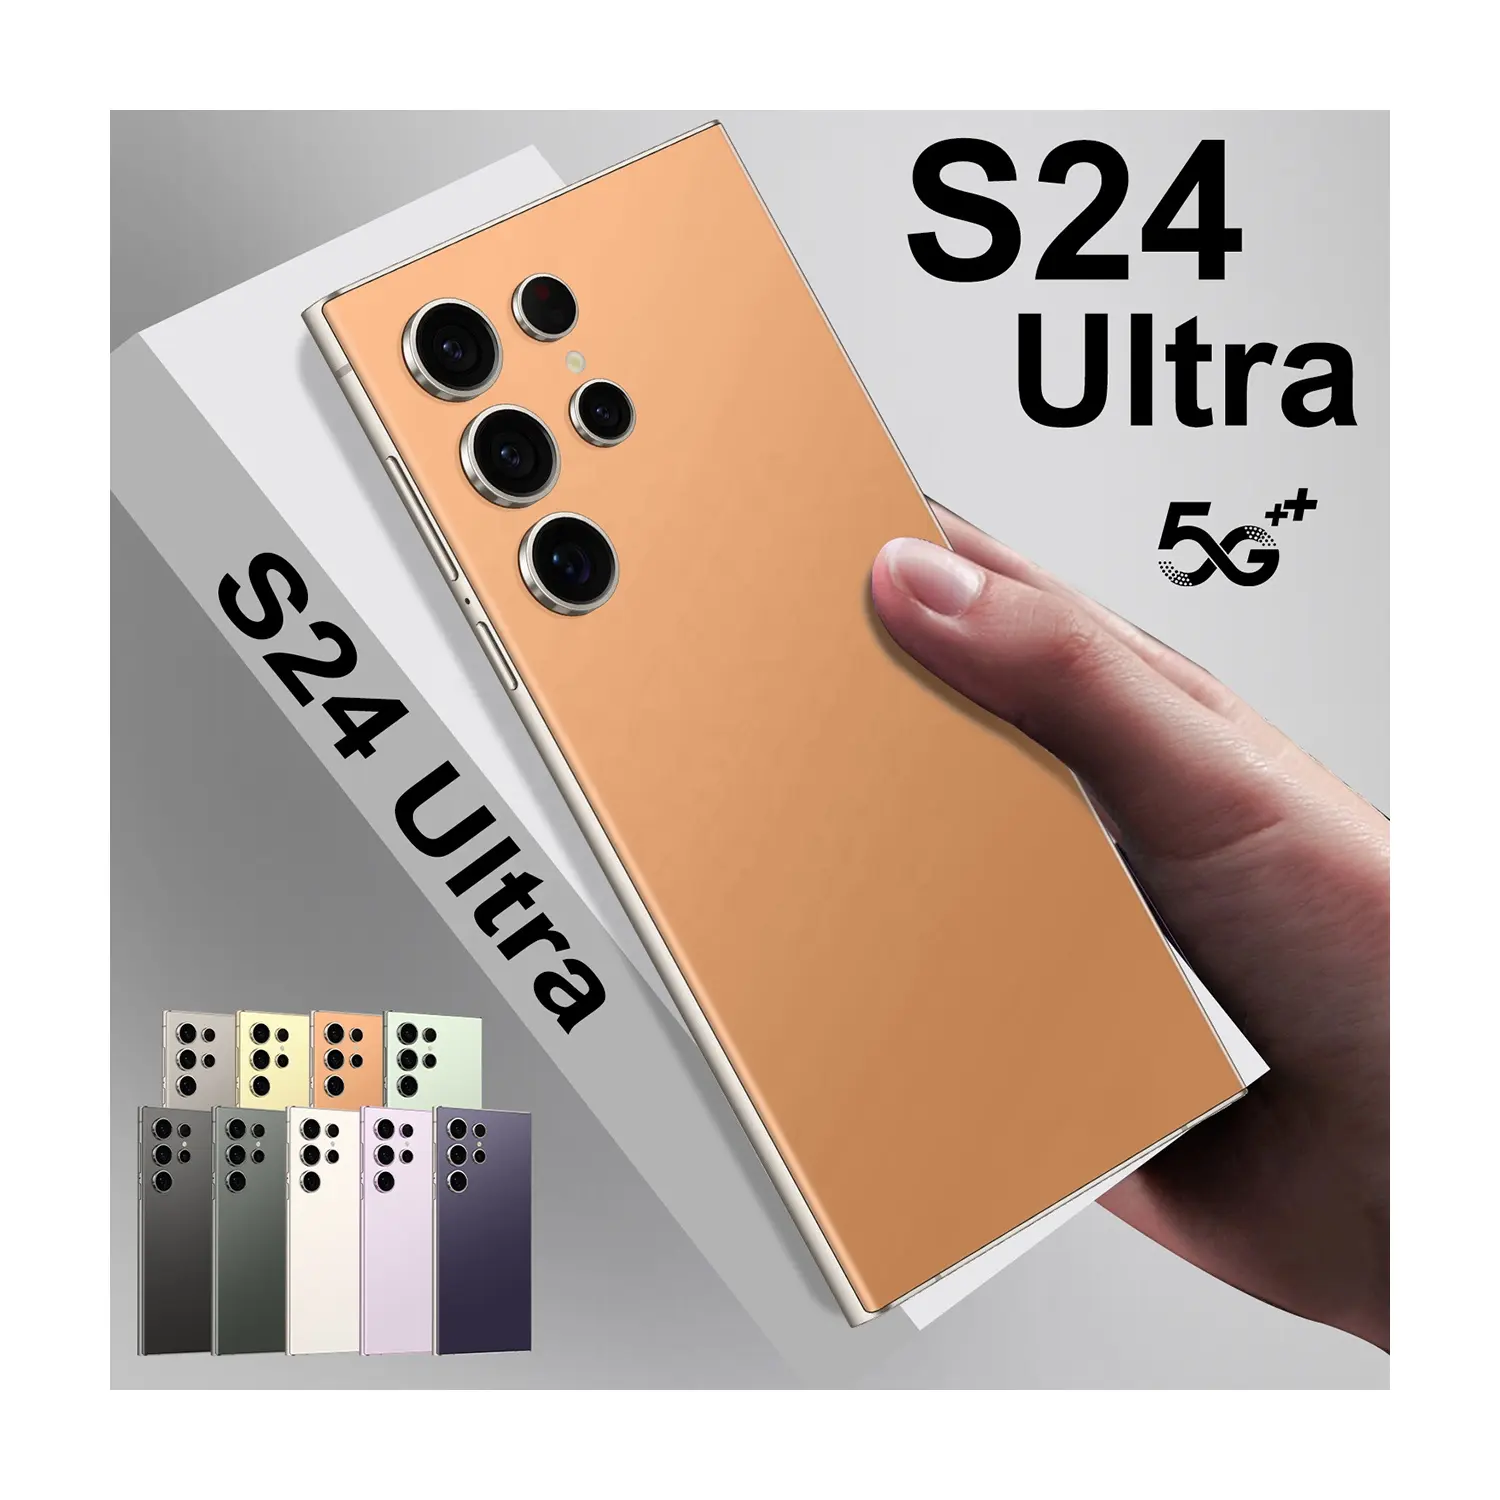 Special Offer s24 ultras 5g smart phone china tecno mobile phone free shipping 5g smartphone